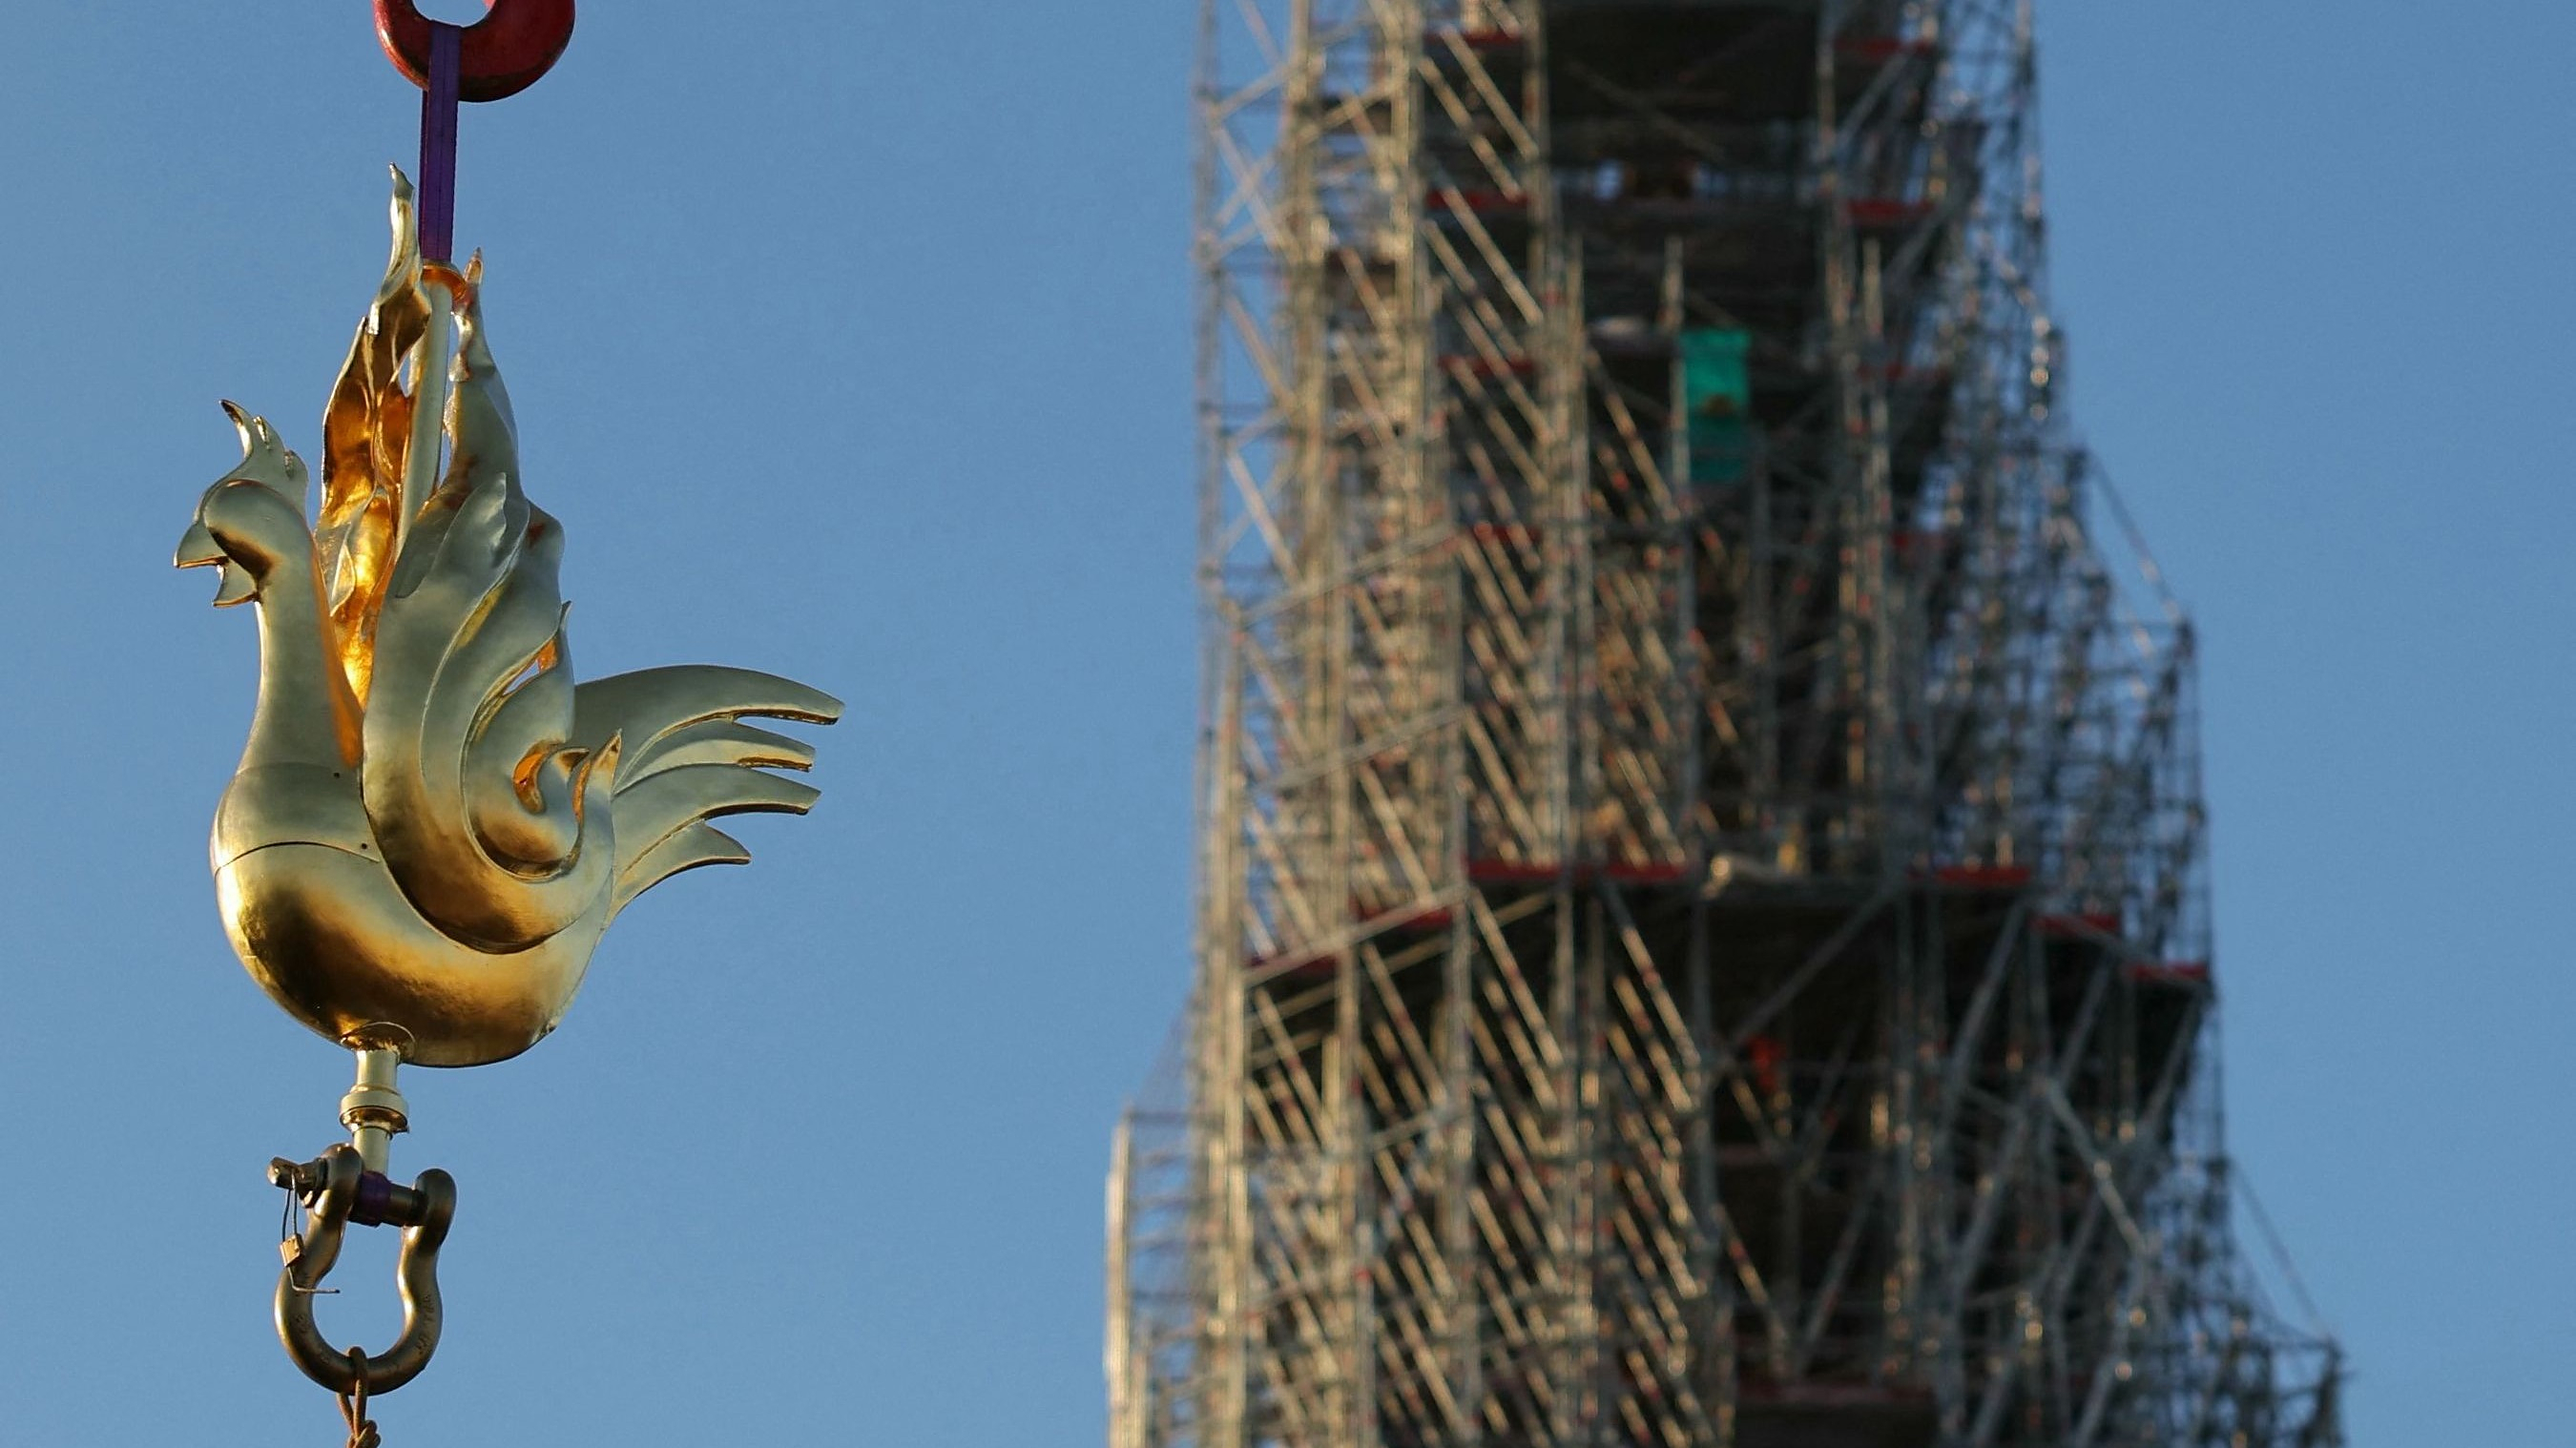 For the Paris Olympic Games, the Notre-Dame spire will be ready